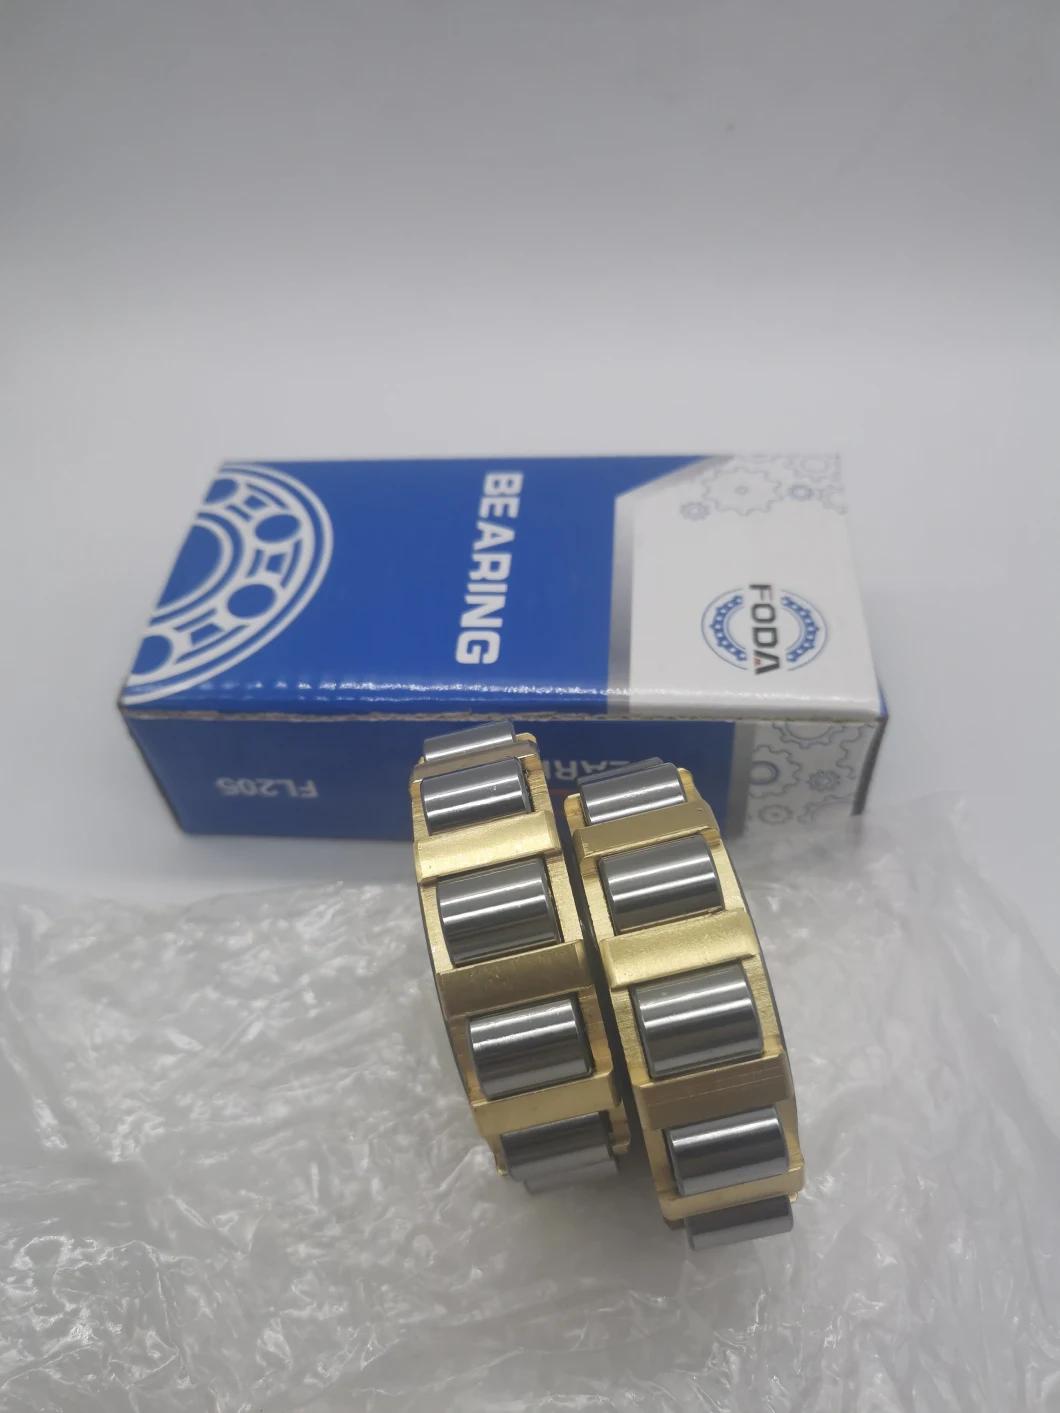 Auto Bearing /Motorcycle Parts/Motorcycle Spare Parts/Bearing (22UZ8311 RN1010 RN1012 RN1014 RN1016 RV1018 RN1020 RN1024 RN202 RN203 RN204 RN205 RN206 RN208)